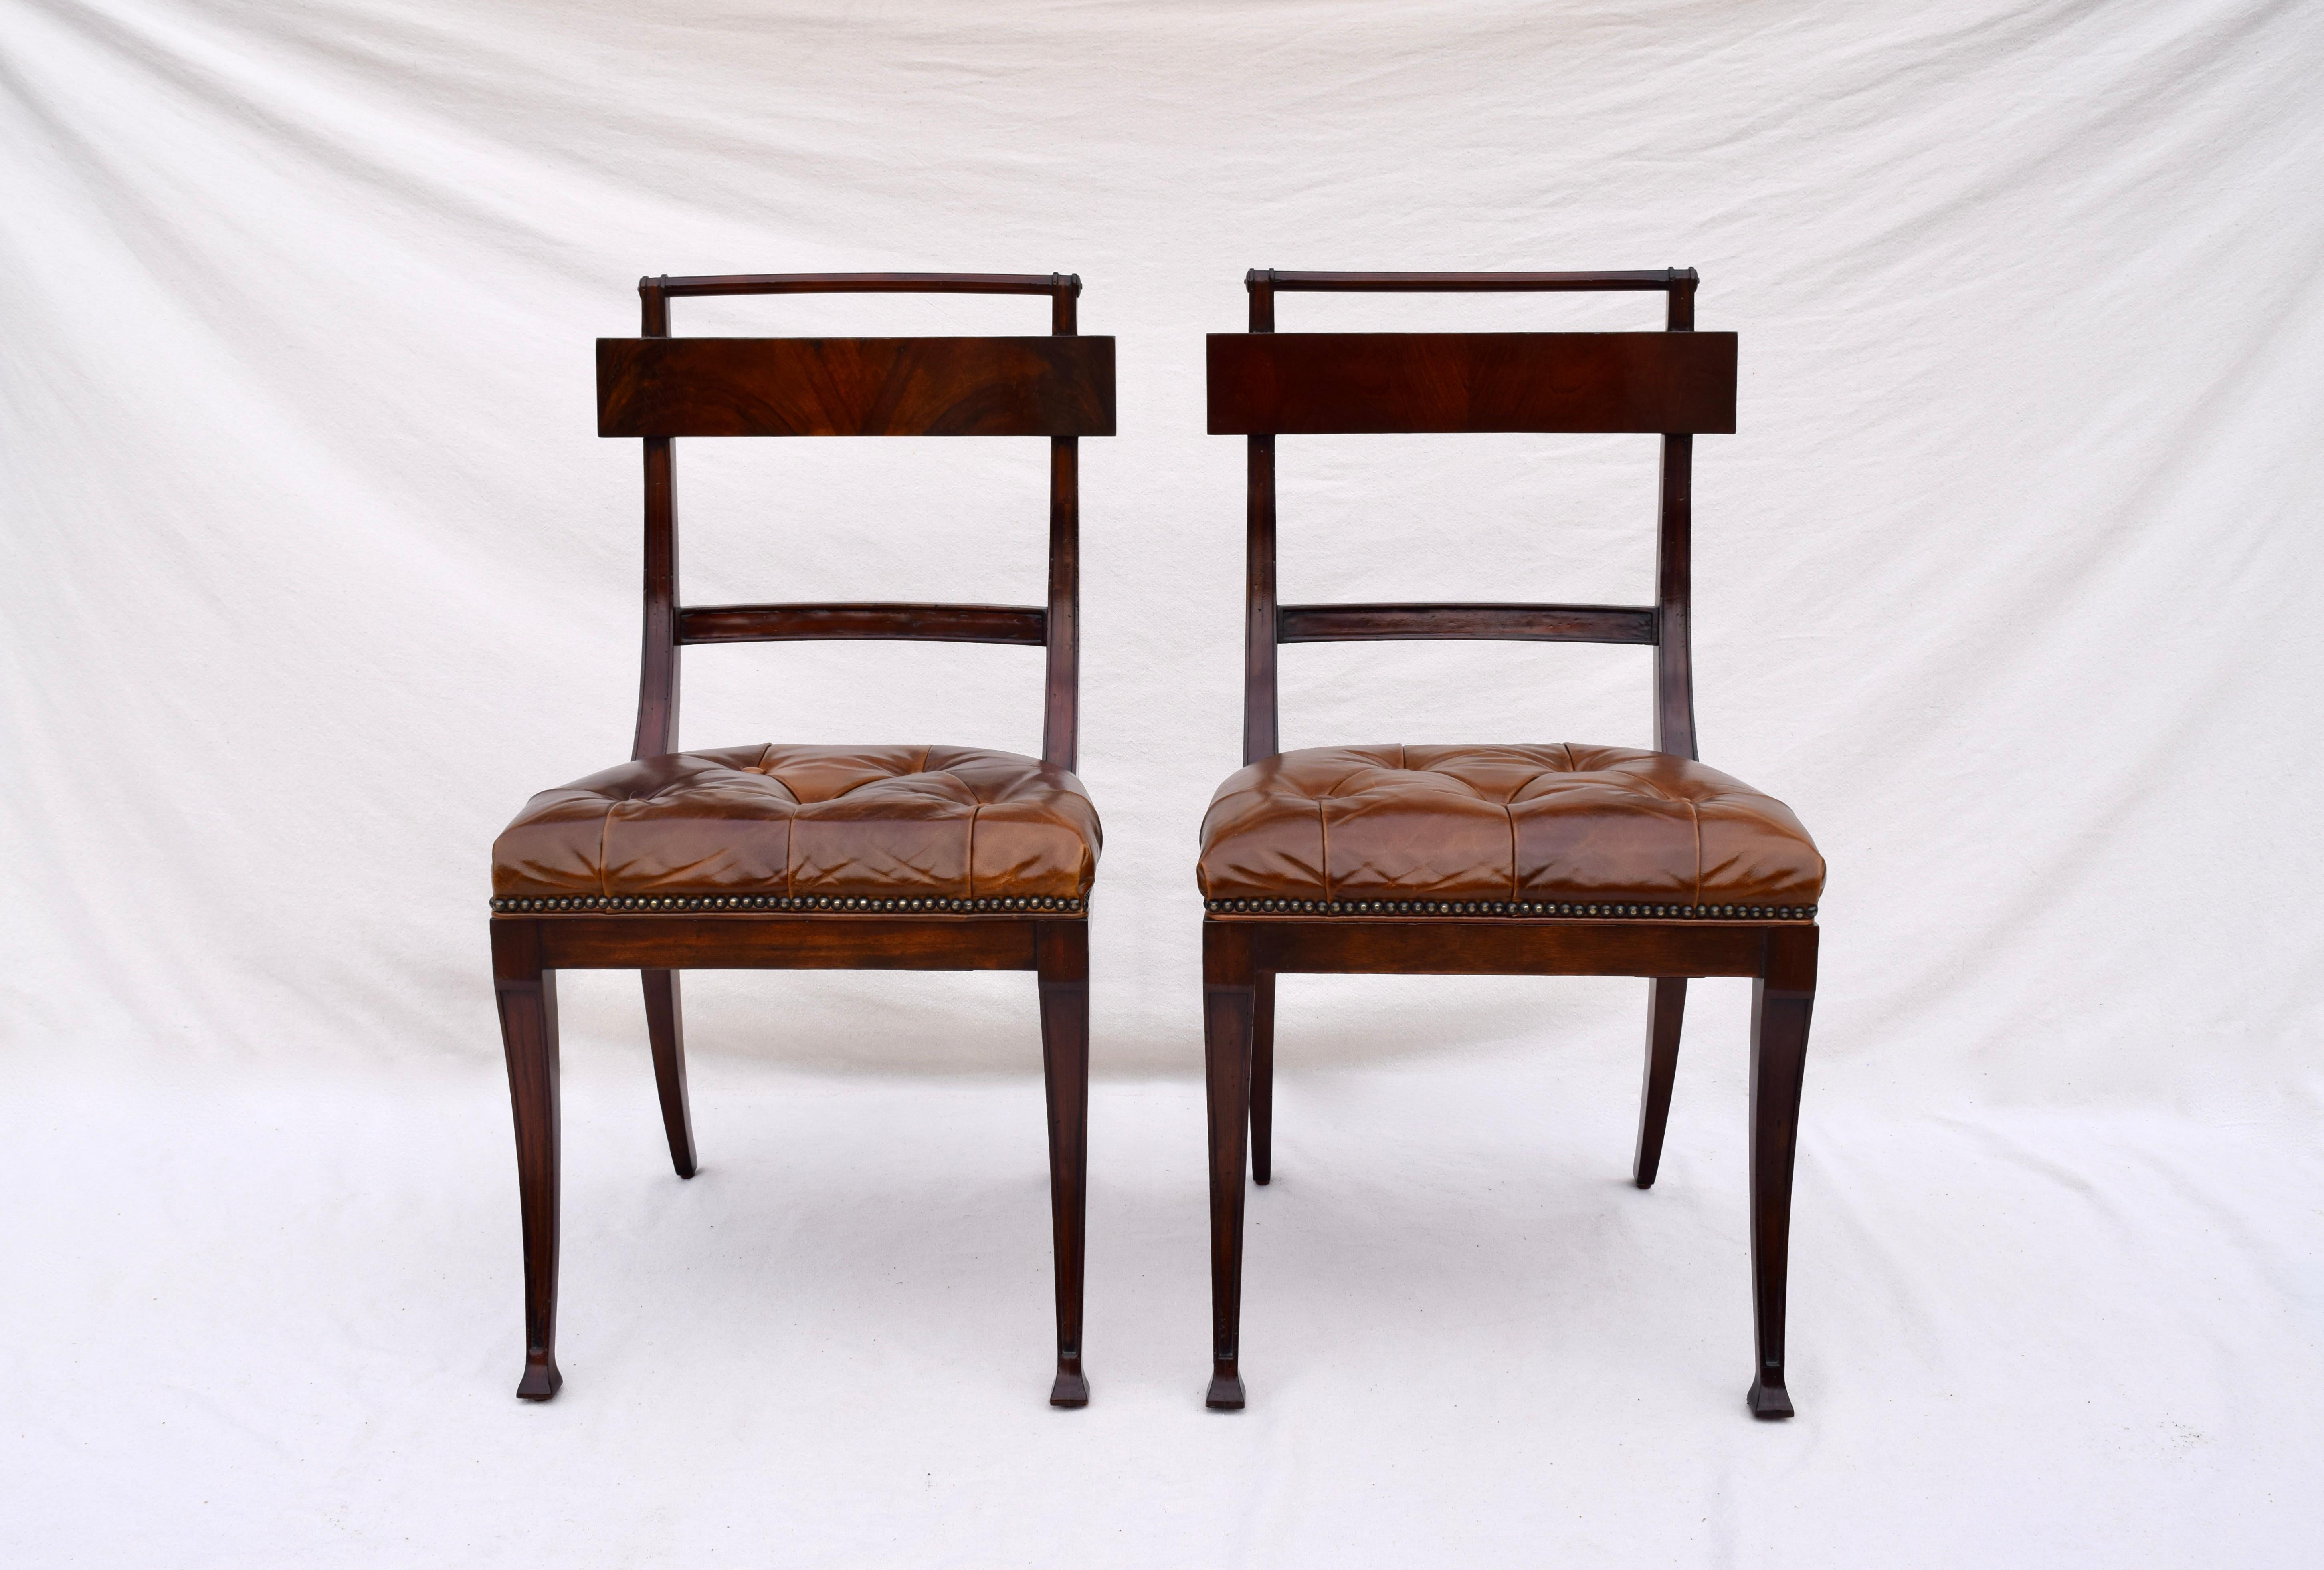 A pair of Henredon antique styled dining chairs, Federal period inspired. Channeled, flame mahogany frame of long slender curves, upholstered in tufted aniline leather with brass tack accents. From Henredon's Acquisitions Collection, we love the